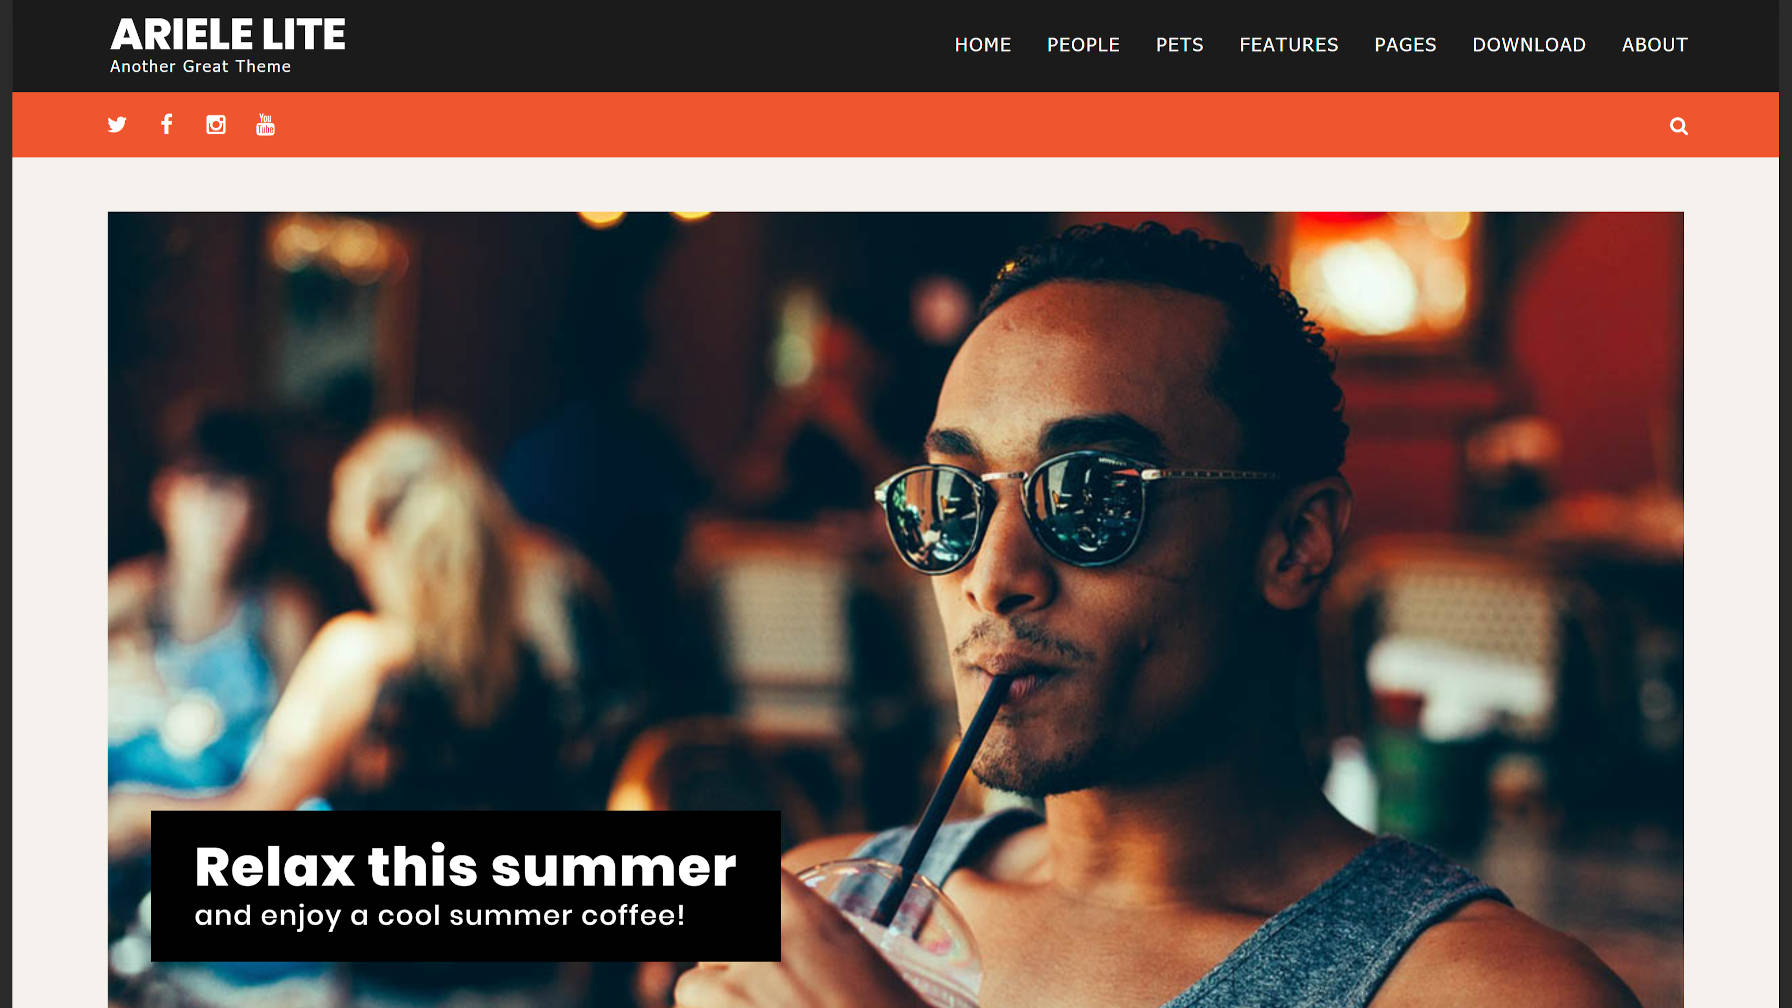 Ariele Lite Is a Fun and Refreshing Theme for WordPress Bloggers